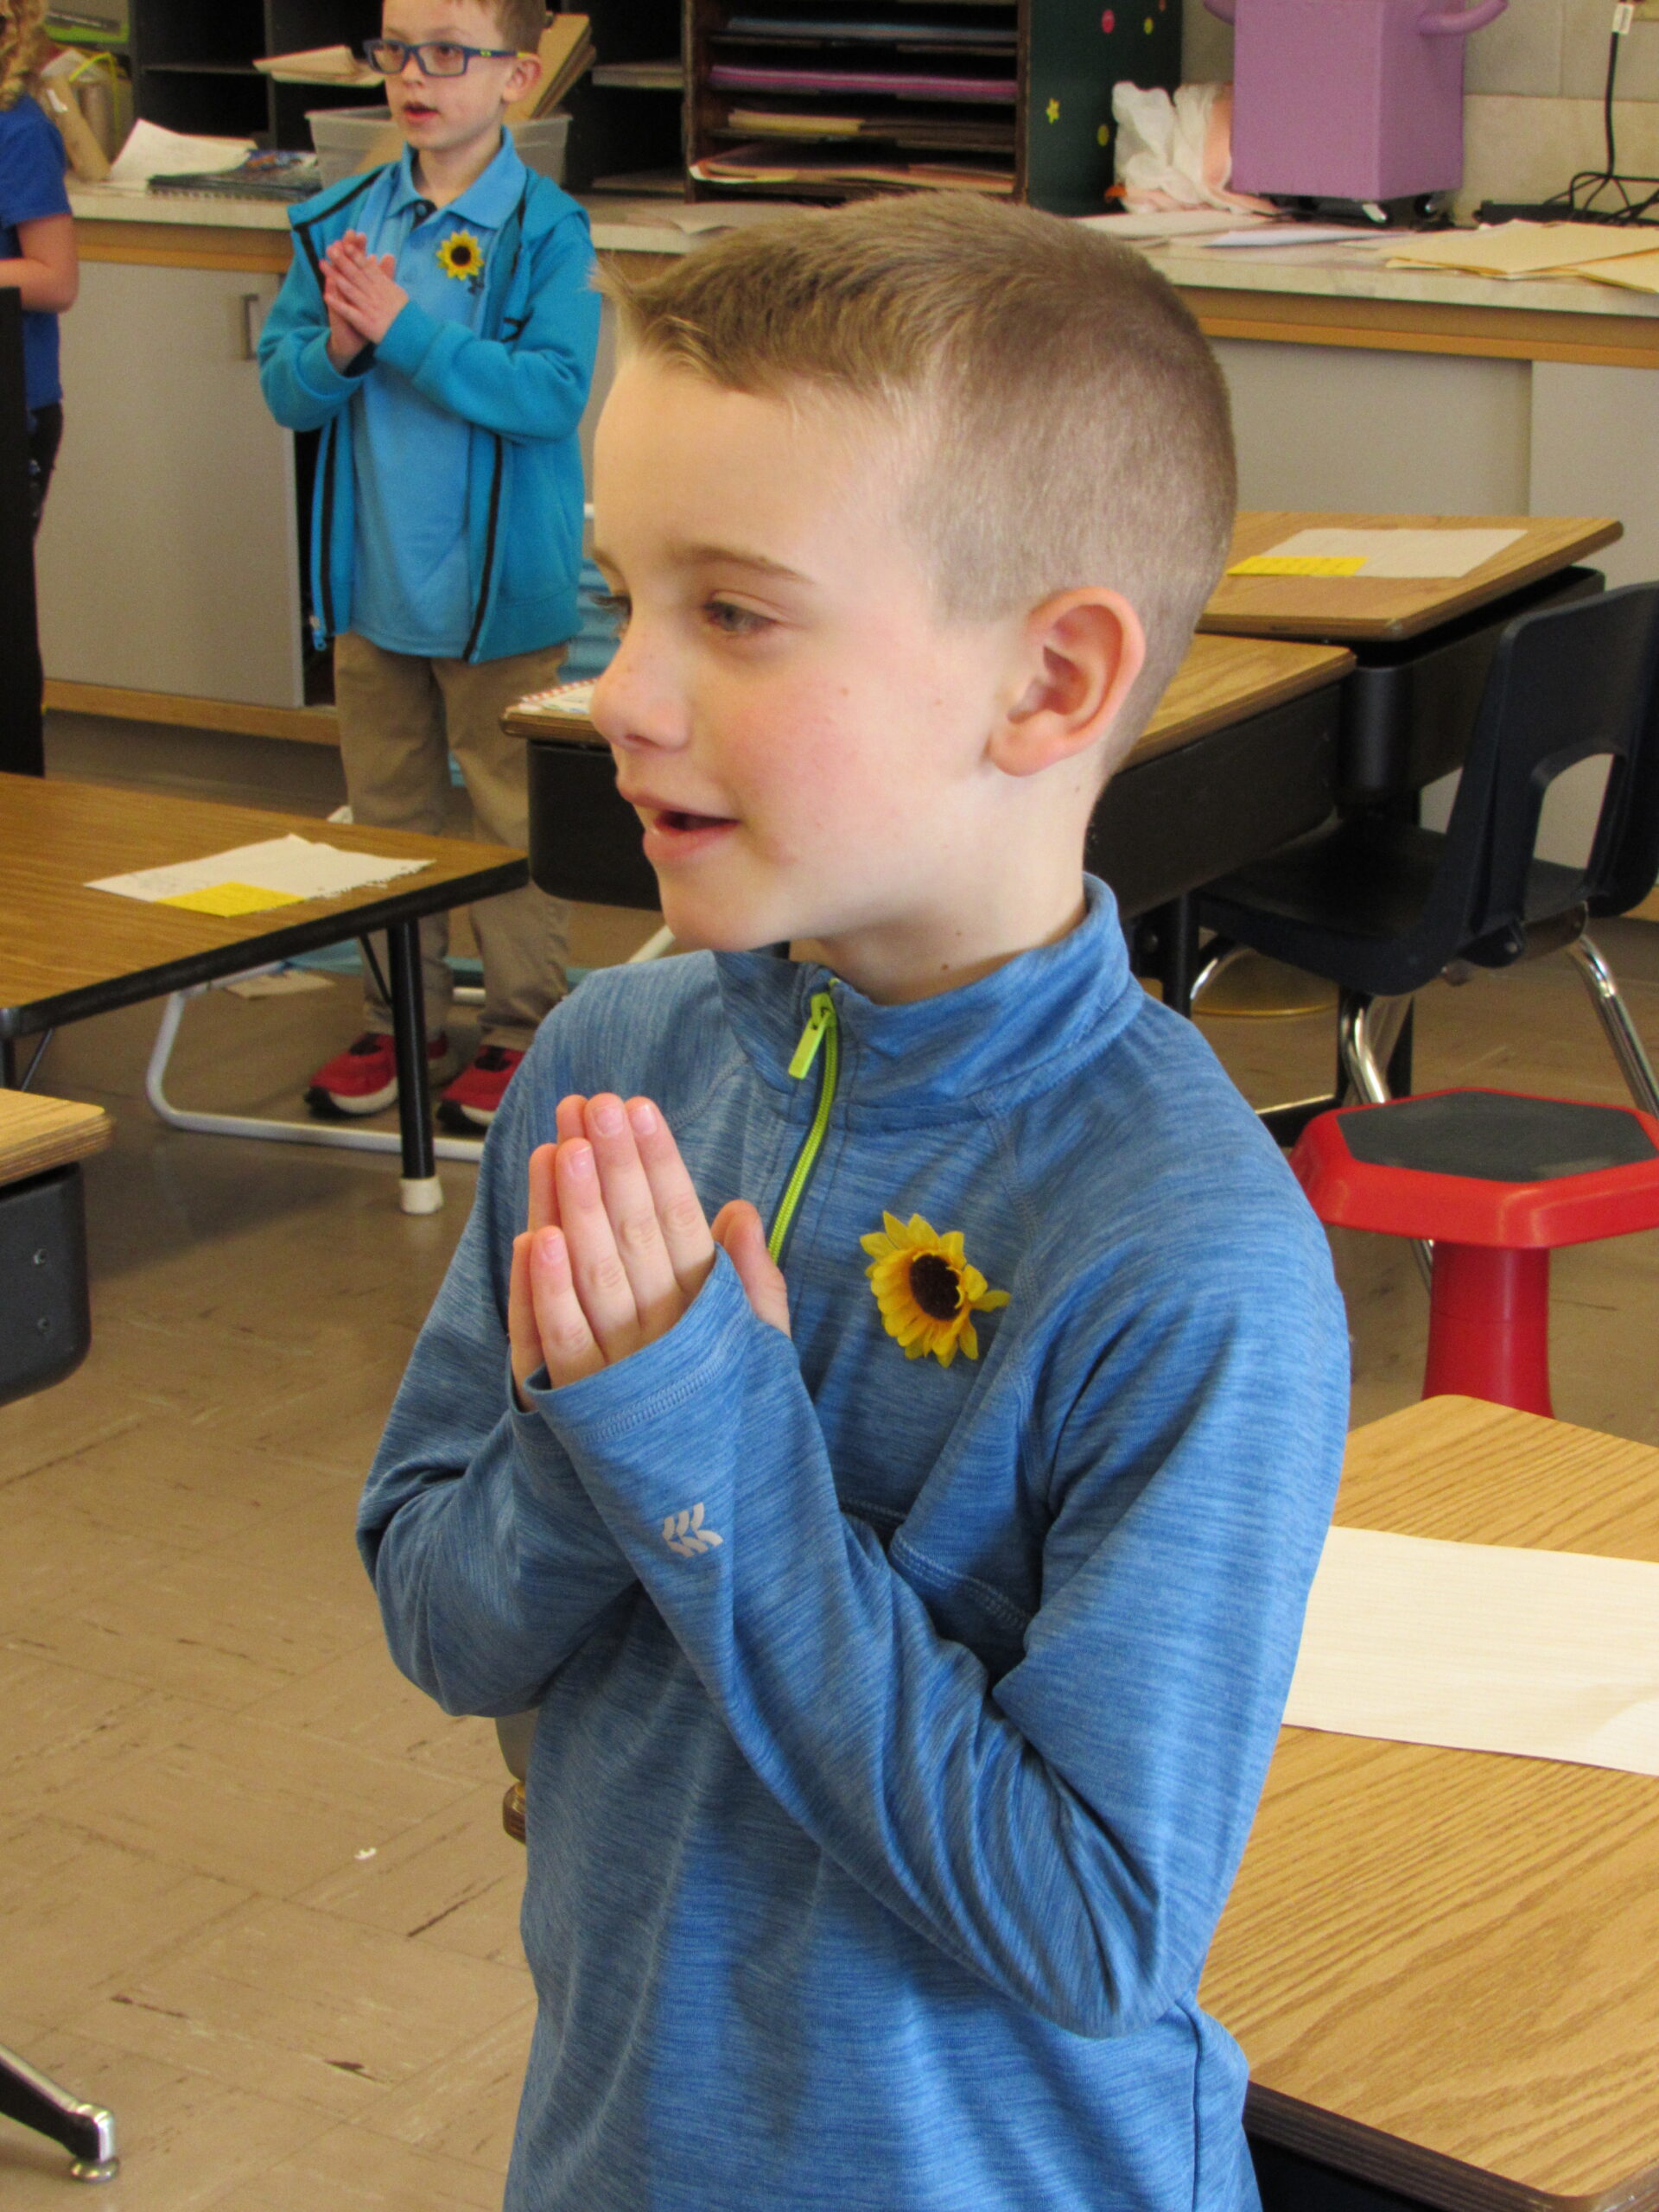 Our Lady of Lourdes Catholic School students at prayer